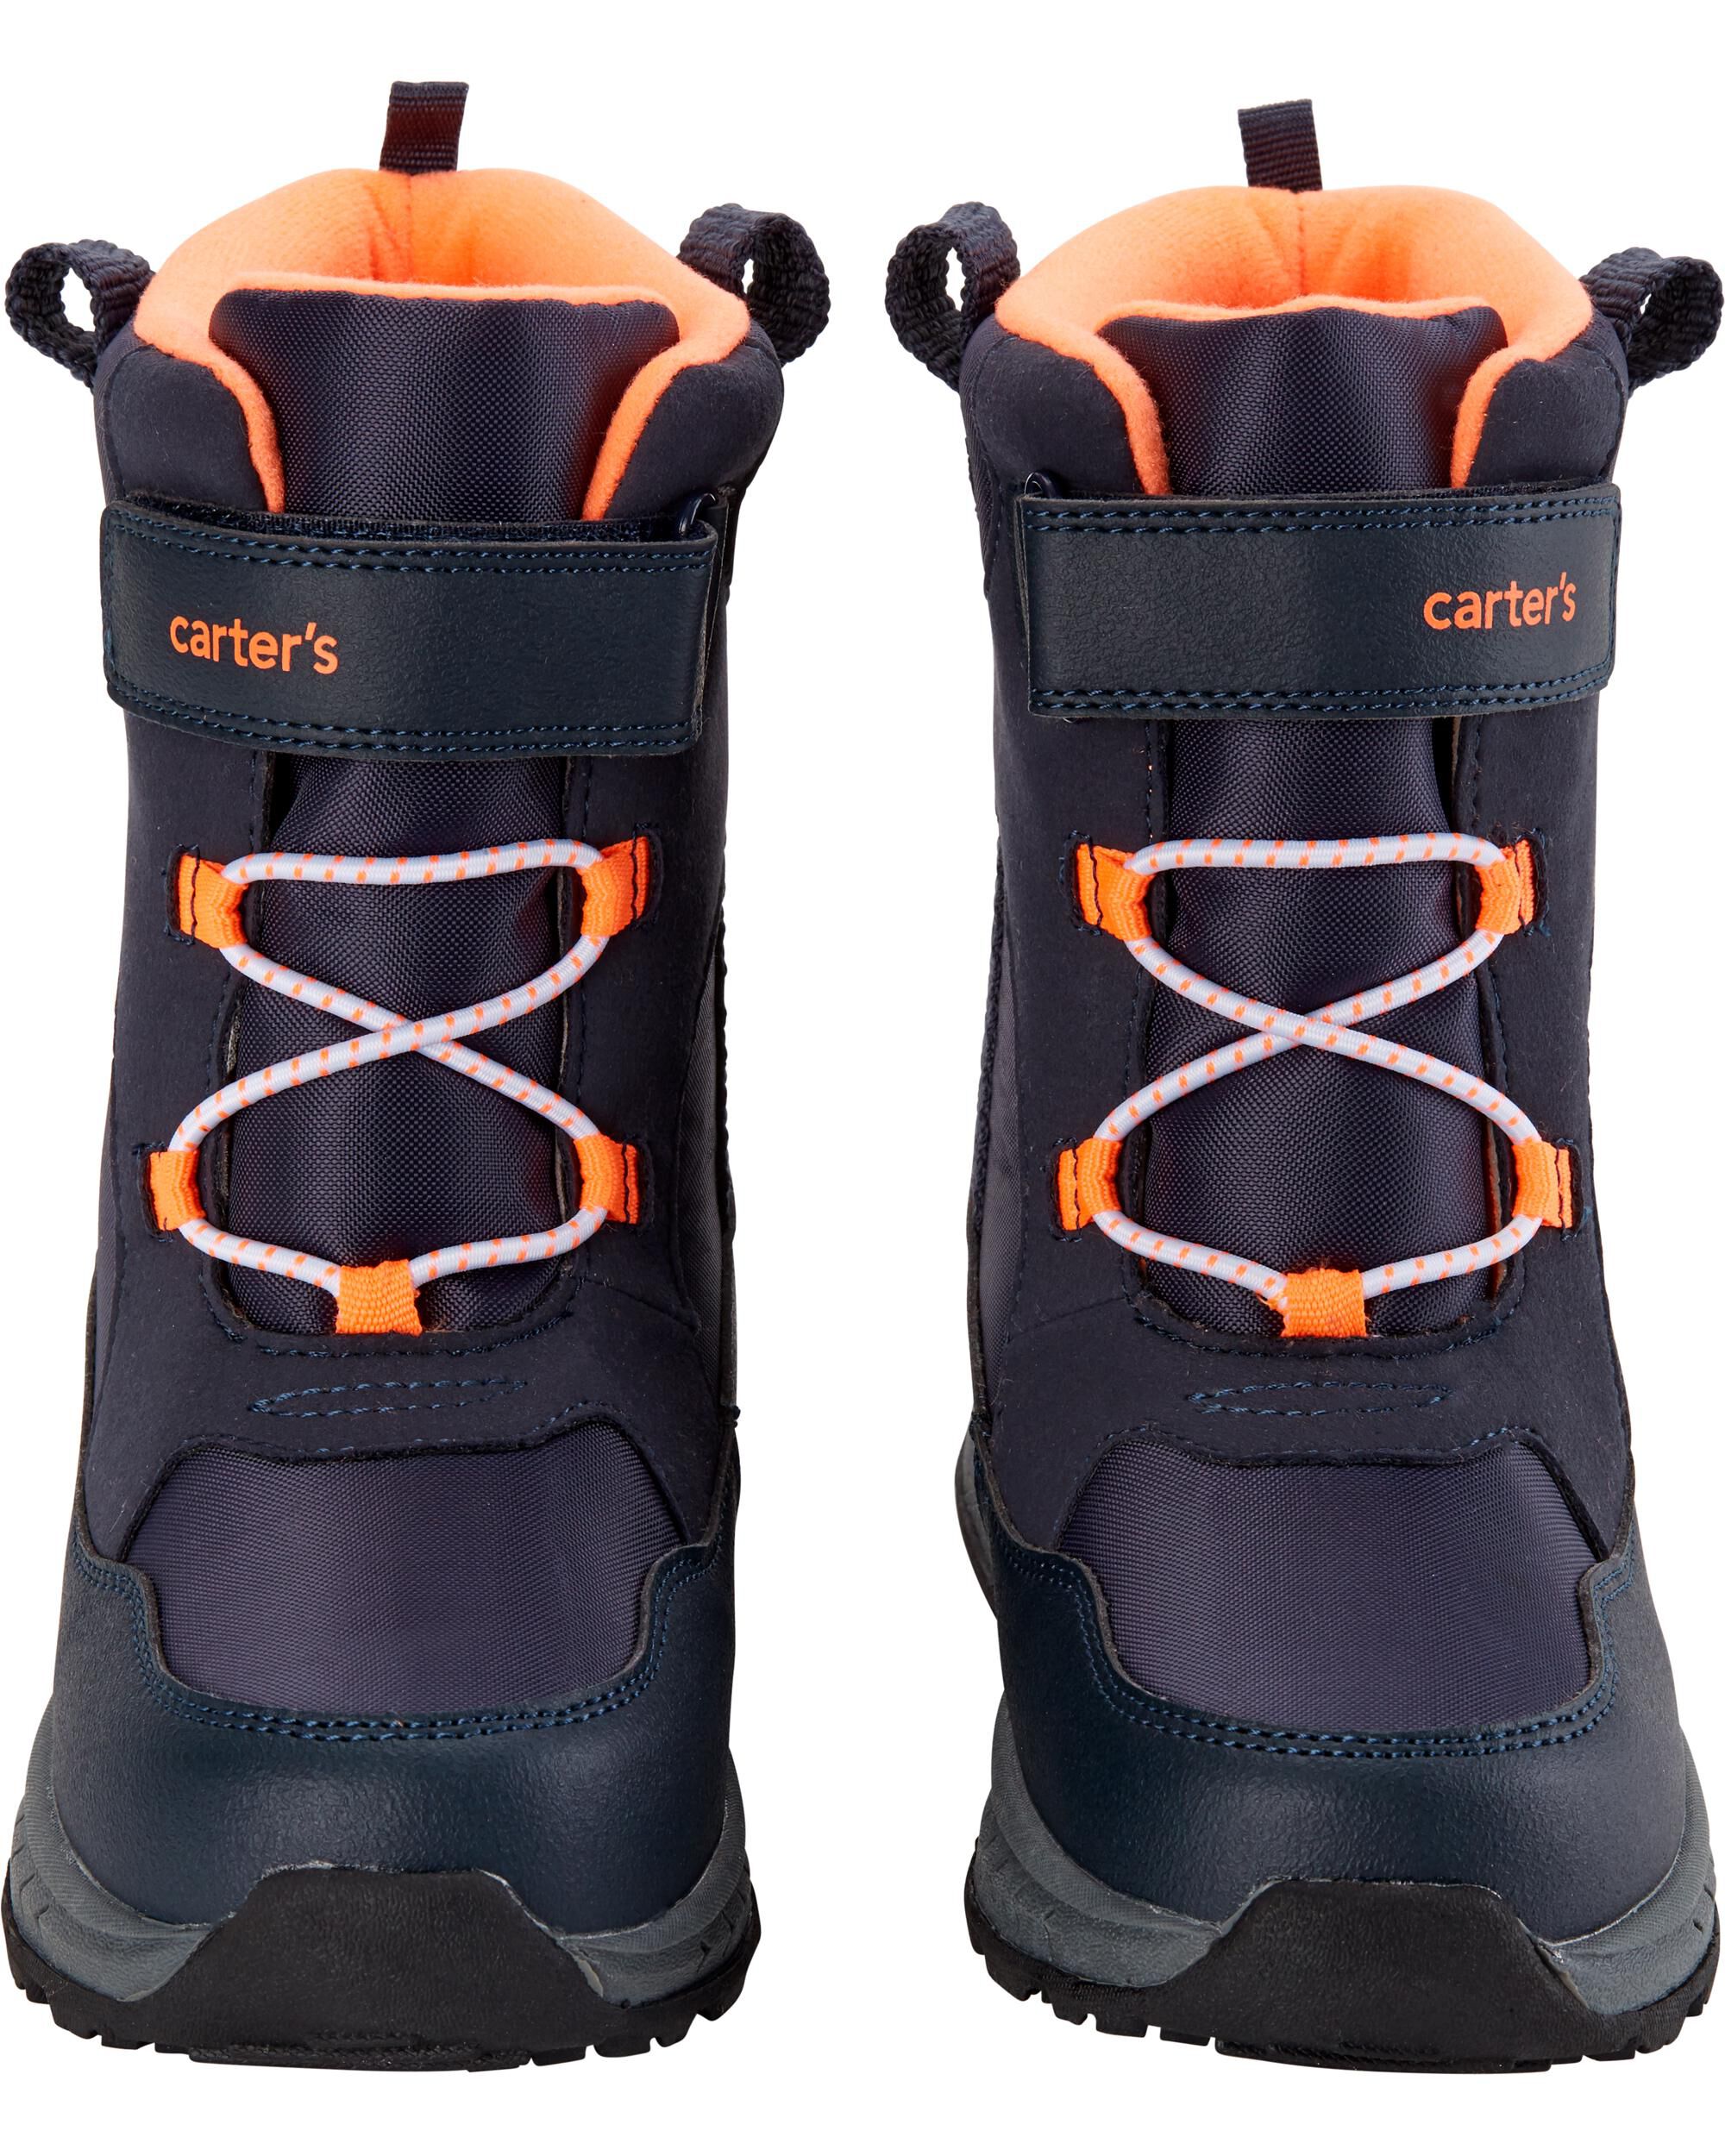 carter boots for toddlers